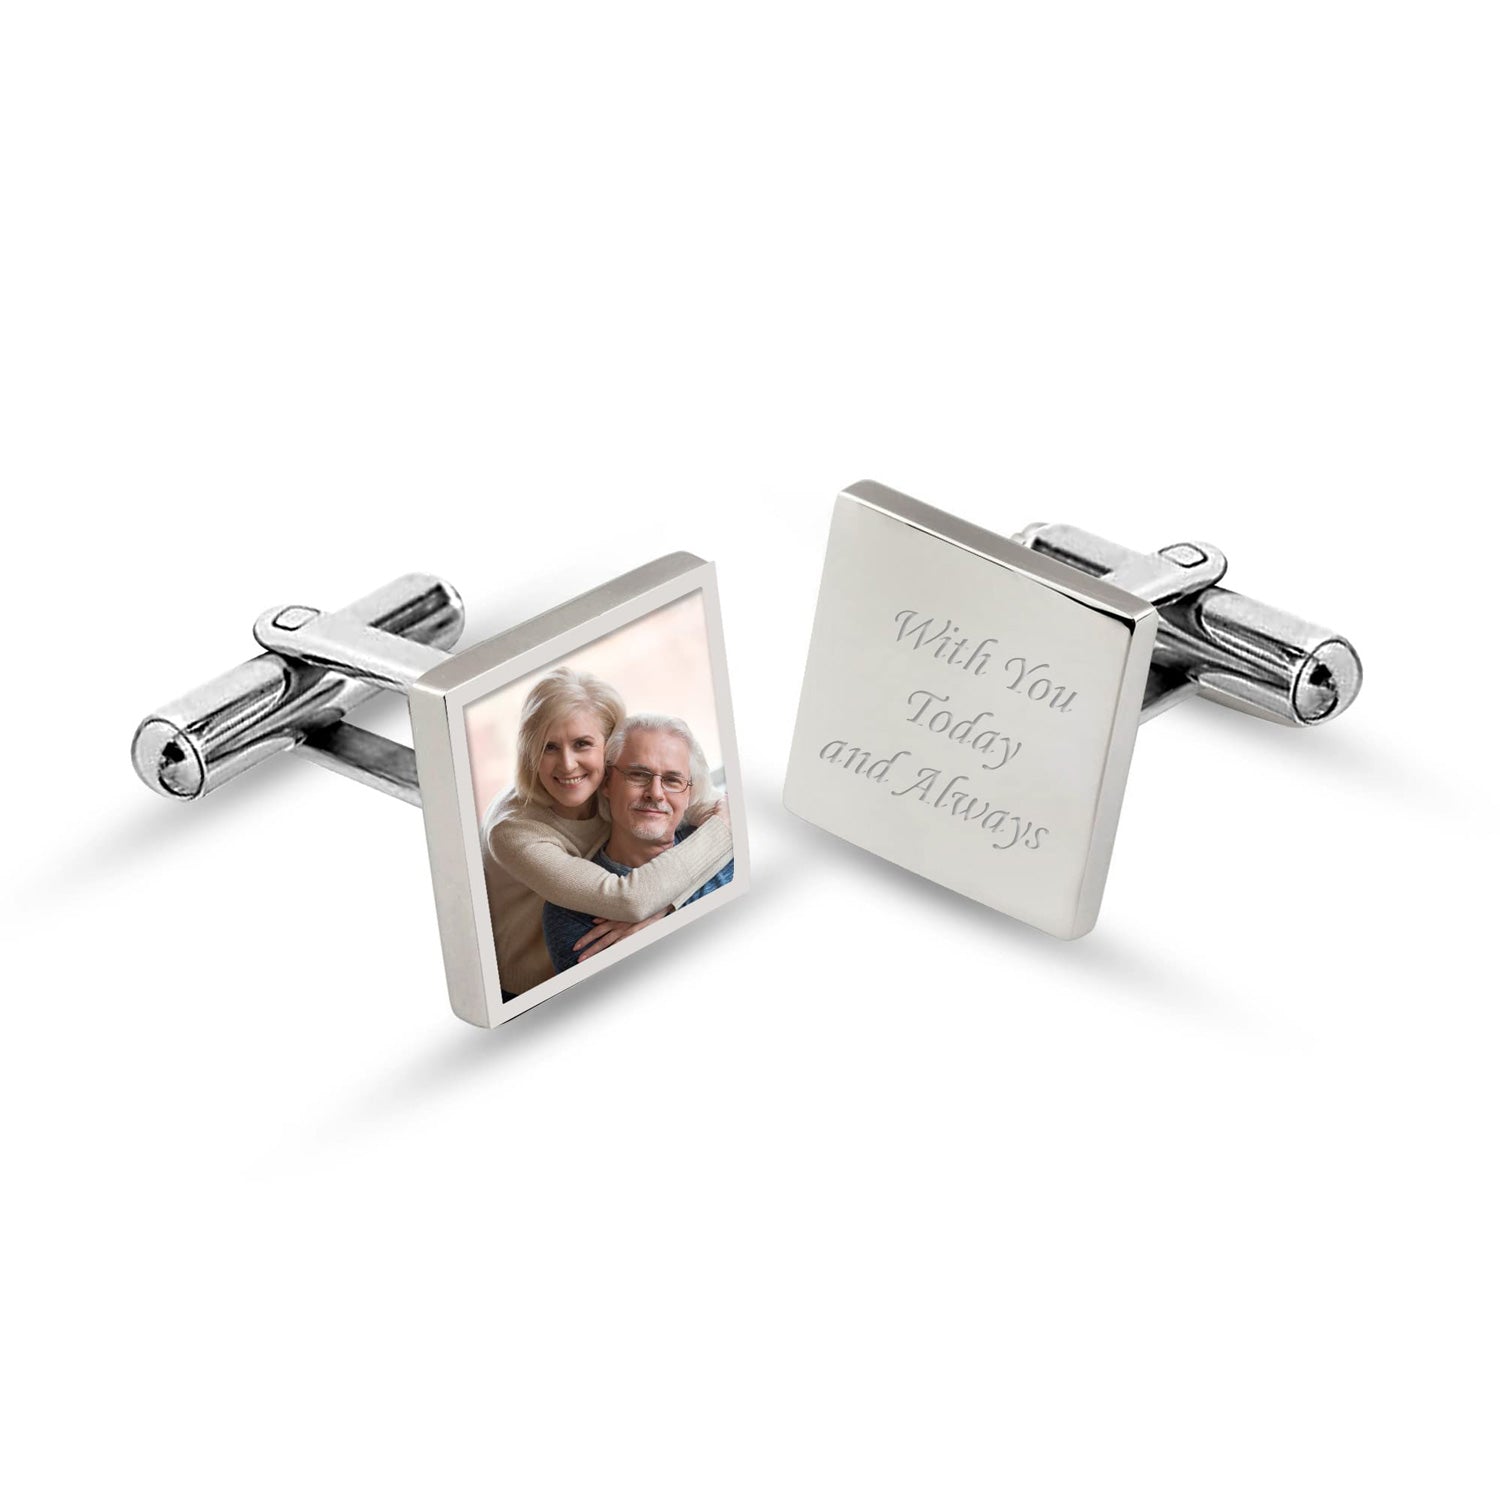 Personalised 925 Sterling Silver Photo Customised Name Message Cufflinks for Men